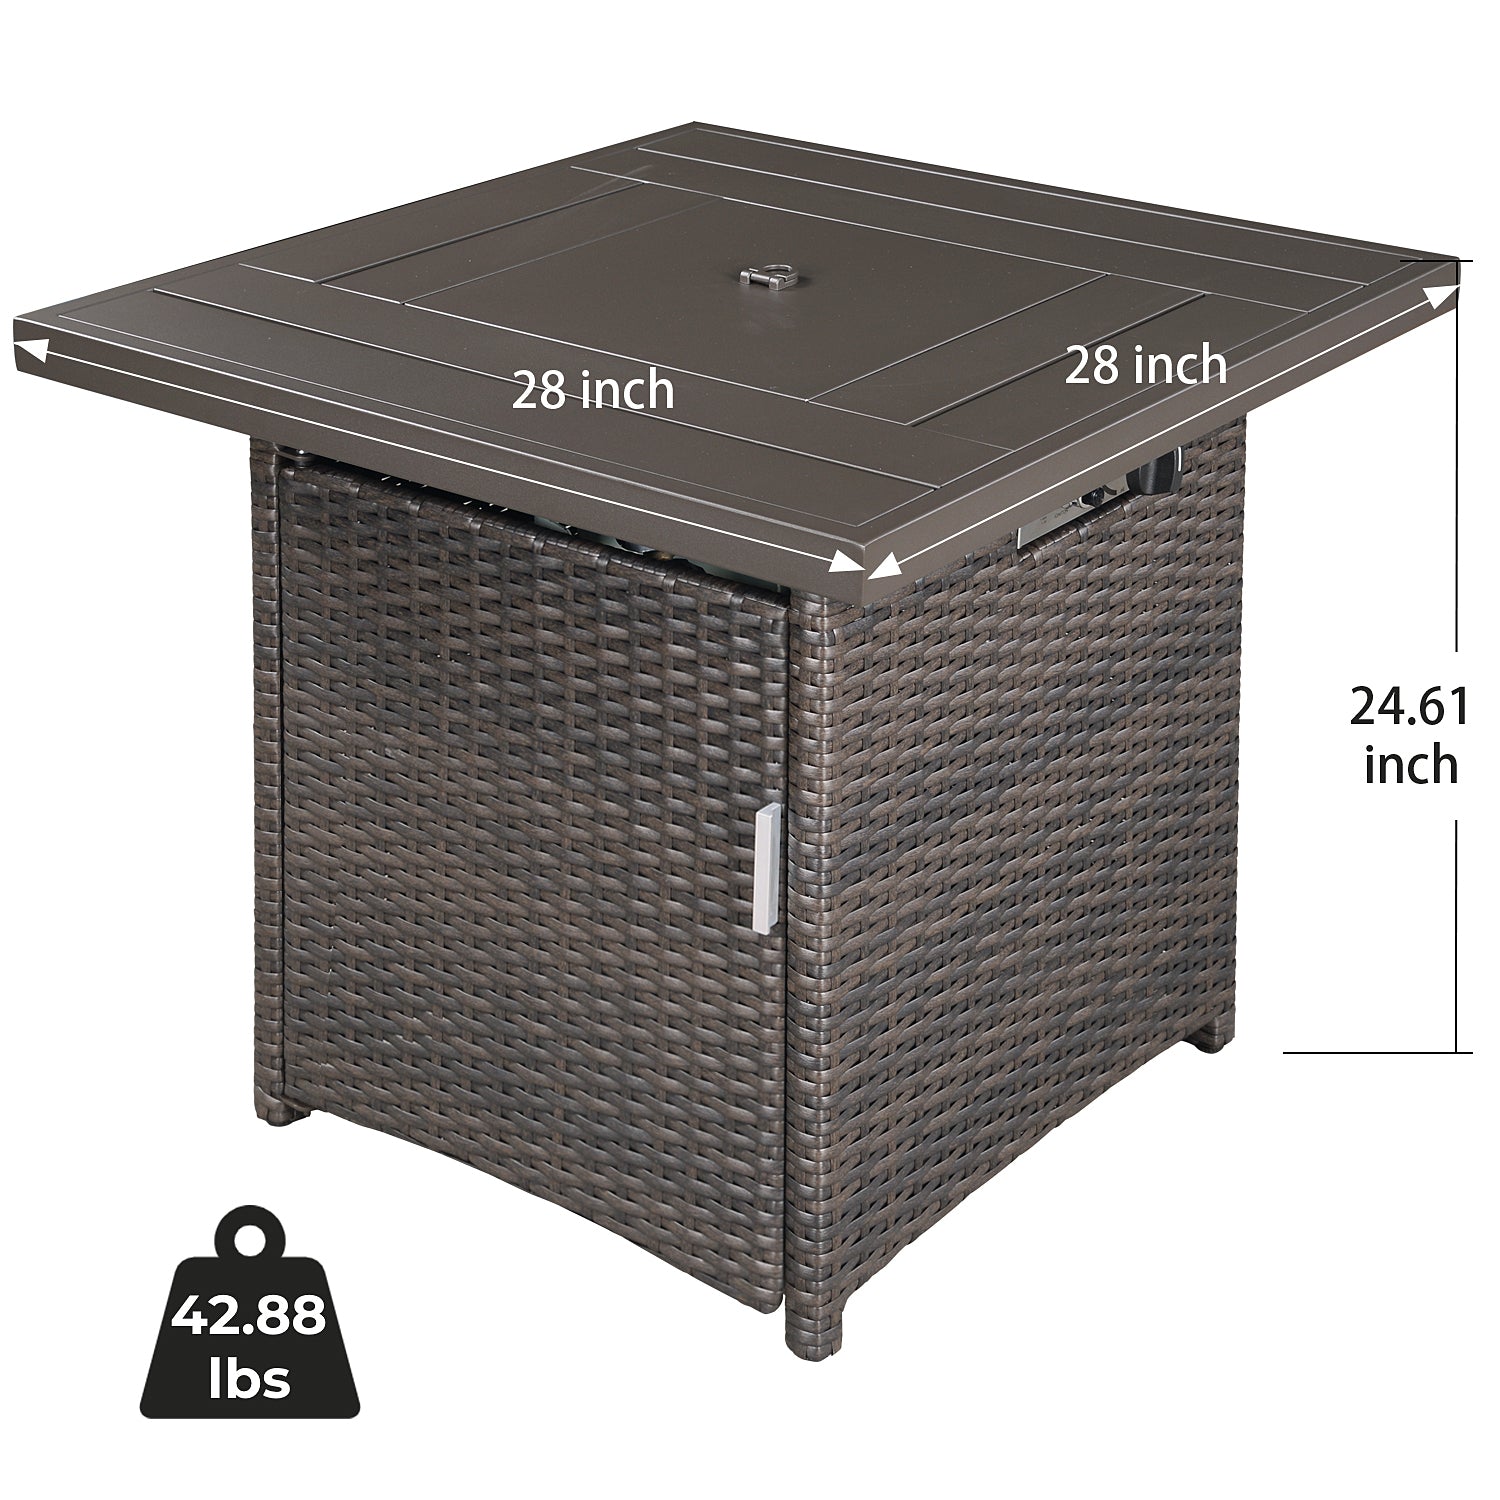 28” Outdoor Wicker Propane Gas Fire Pit Table with Lid, Glass Beads